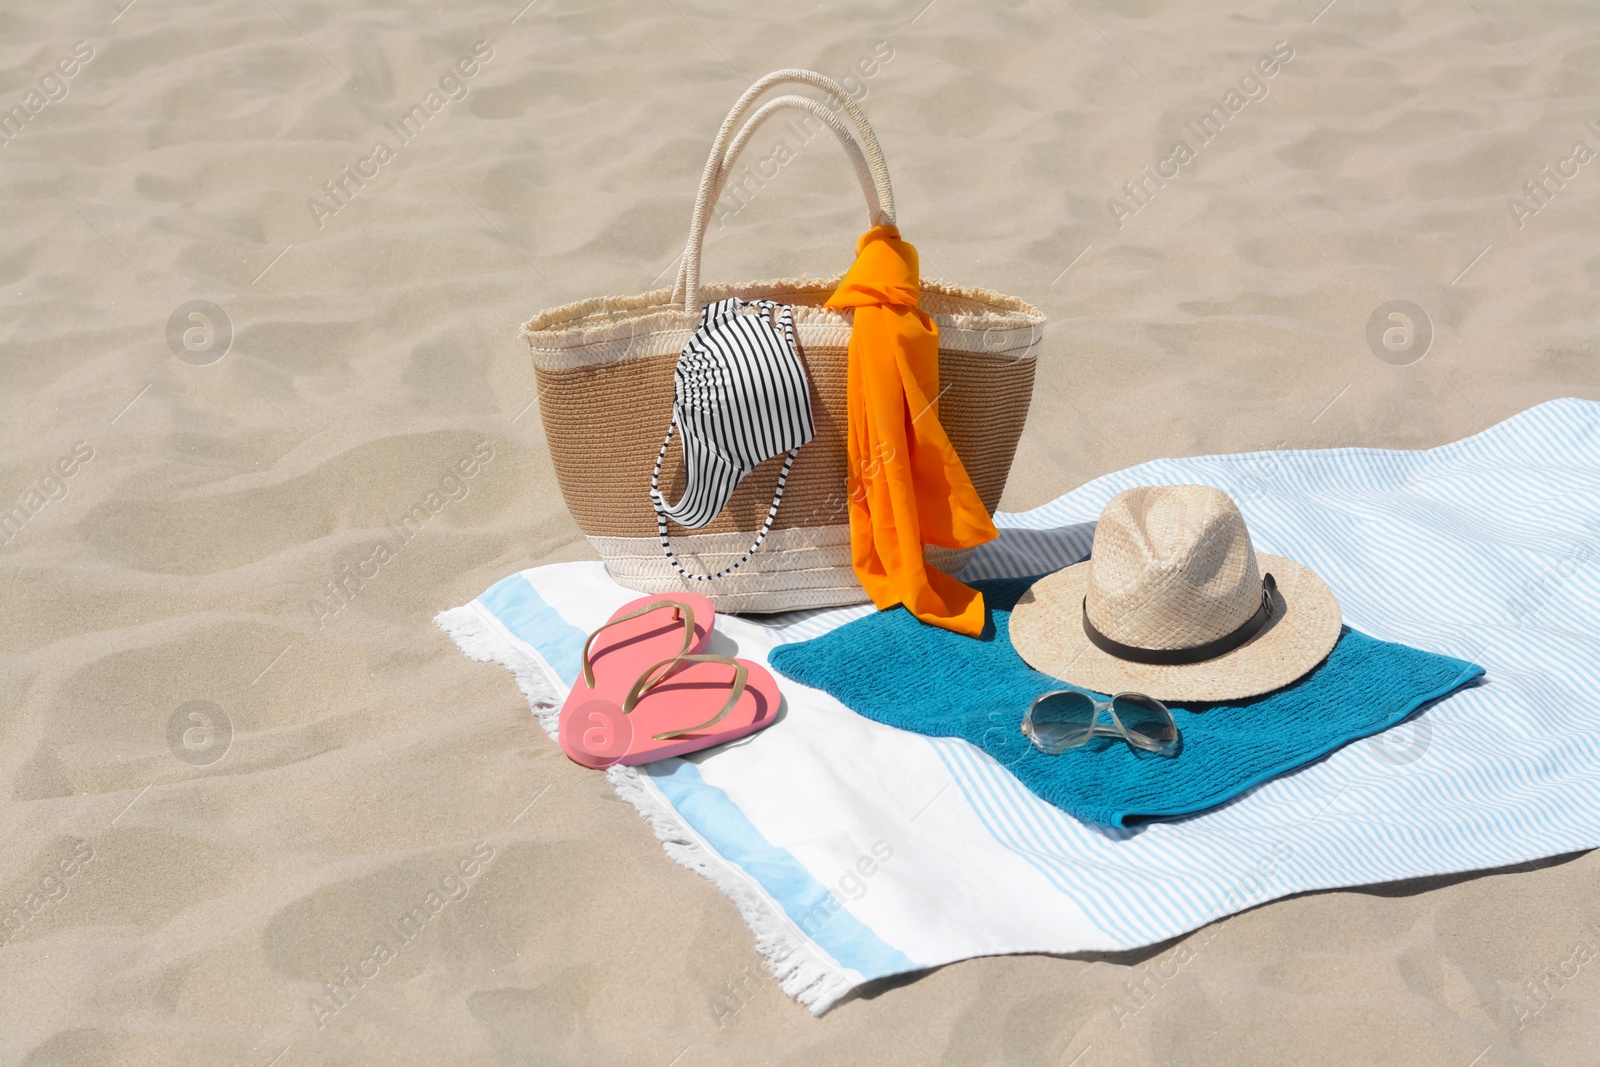 Photo of Blue blanket with towel, bag and beach accessories on sand